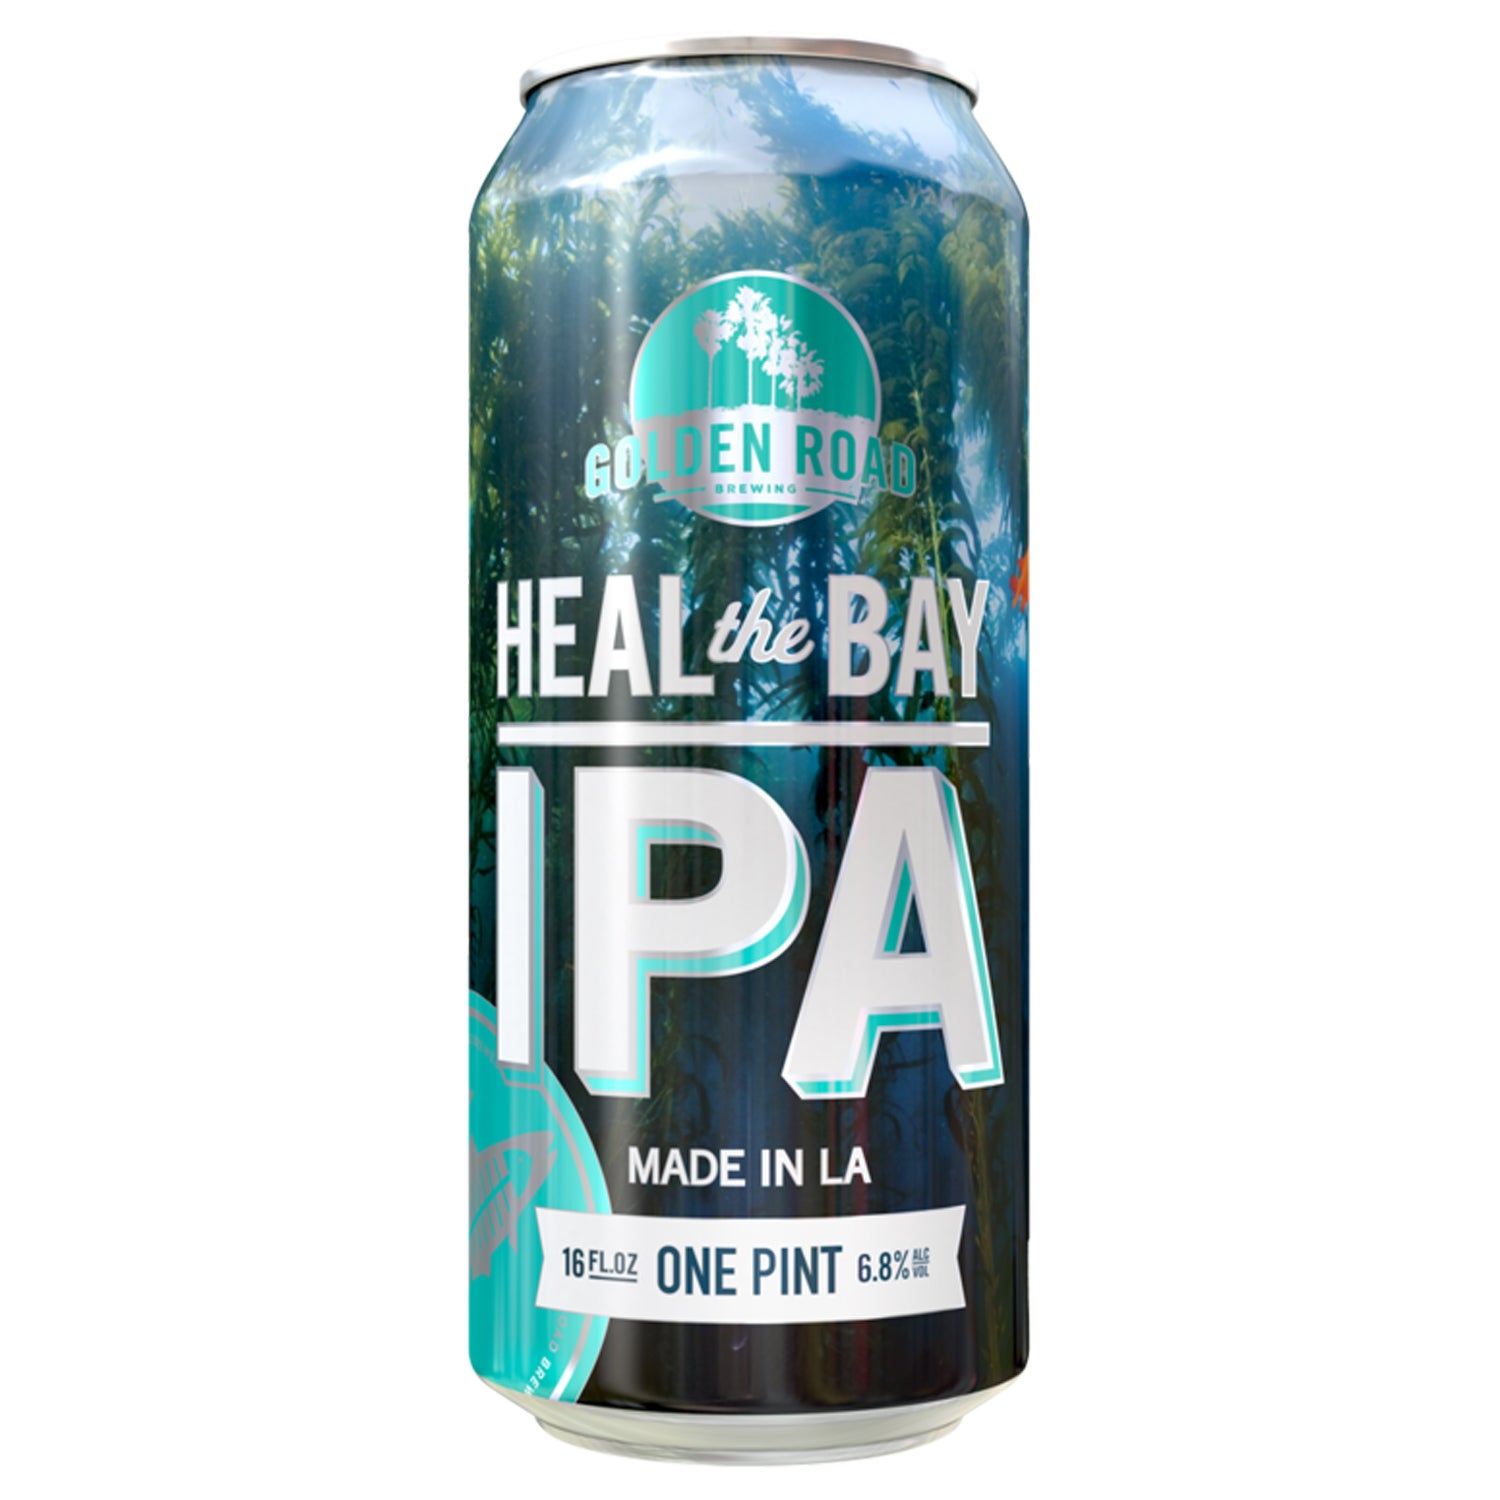 golden road brewing heal the bay ipa outside canned beer fall hiking or camping